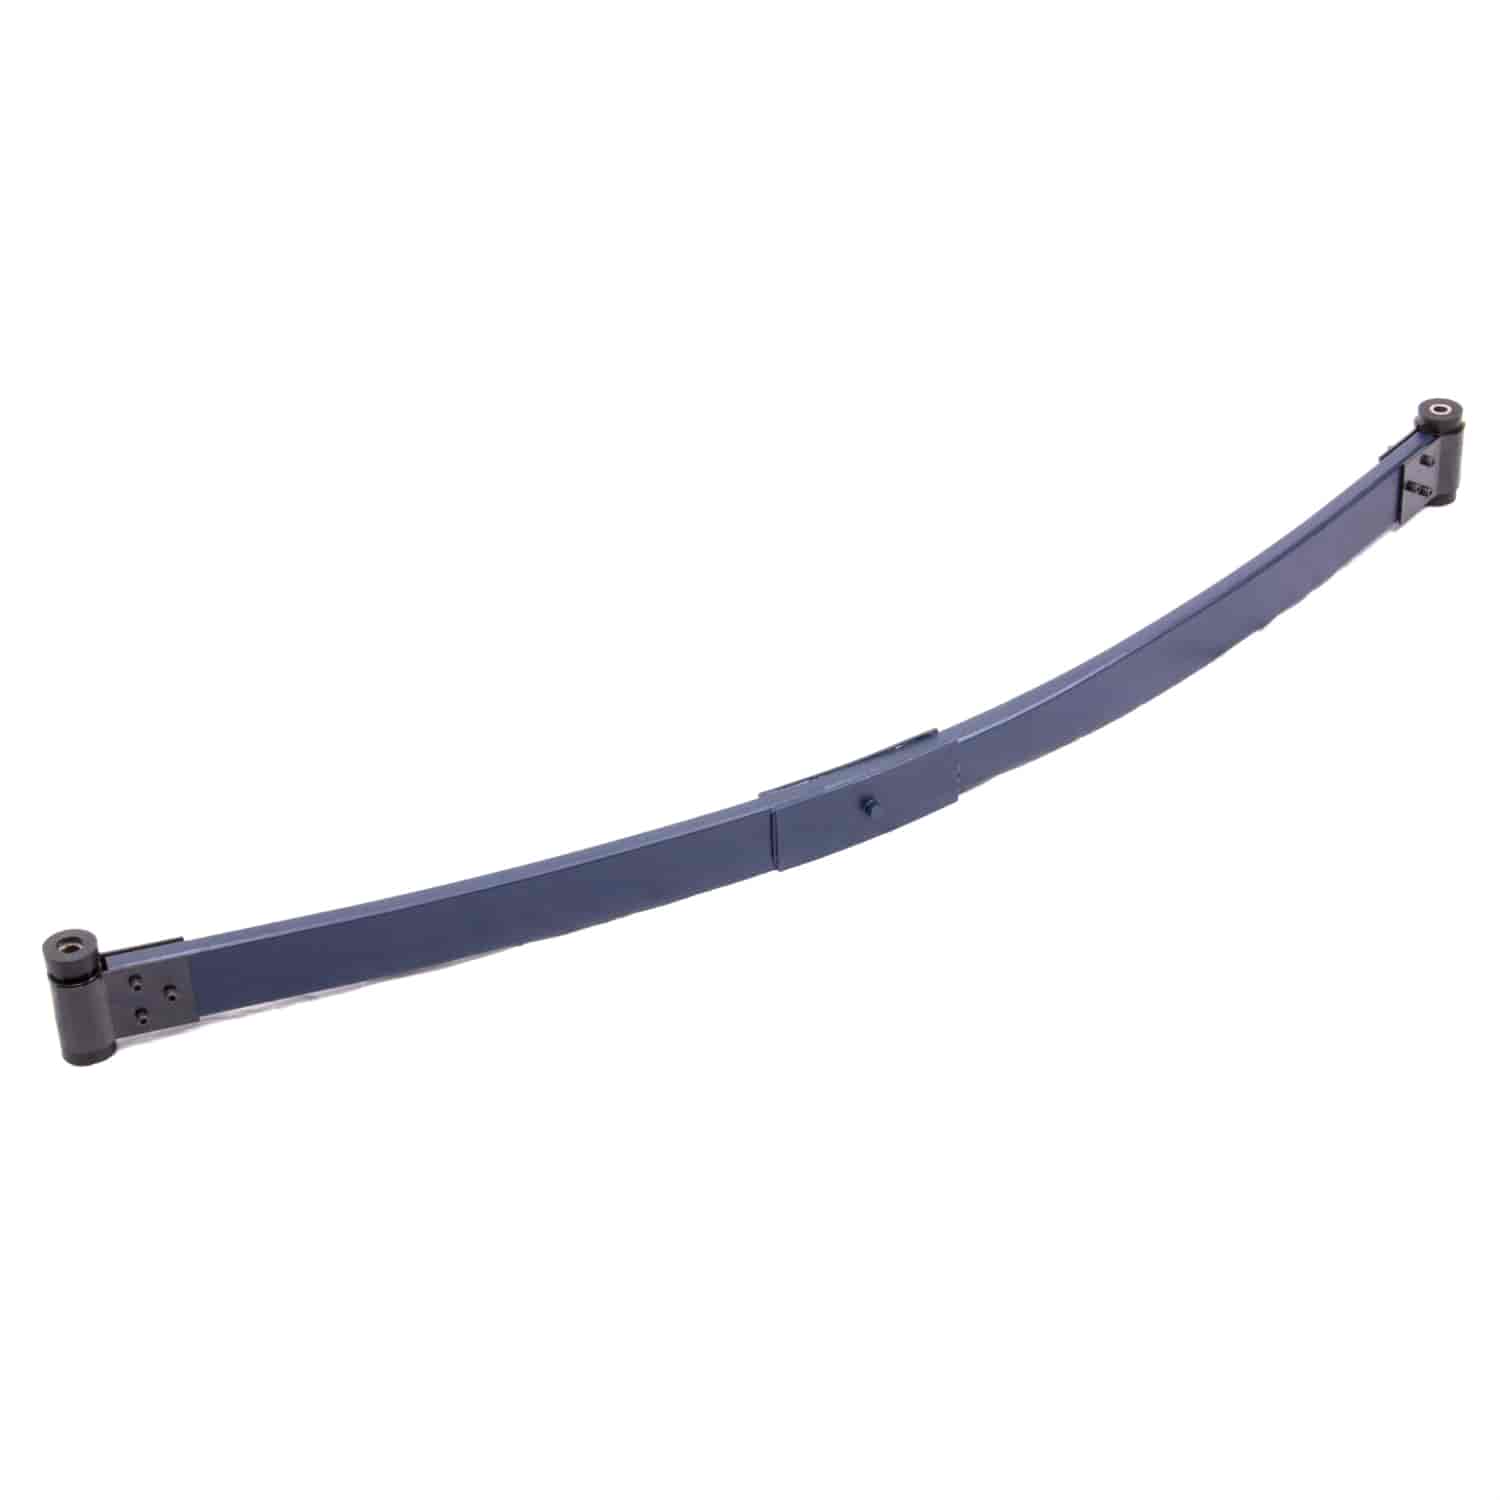 Composite Leaf Spring GM Style - 225 lbs.